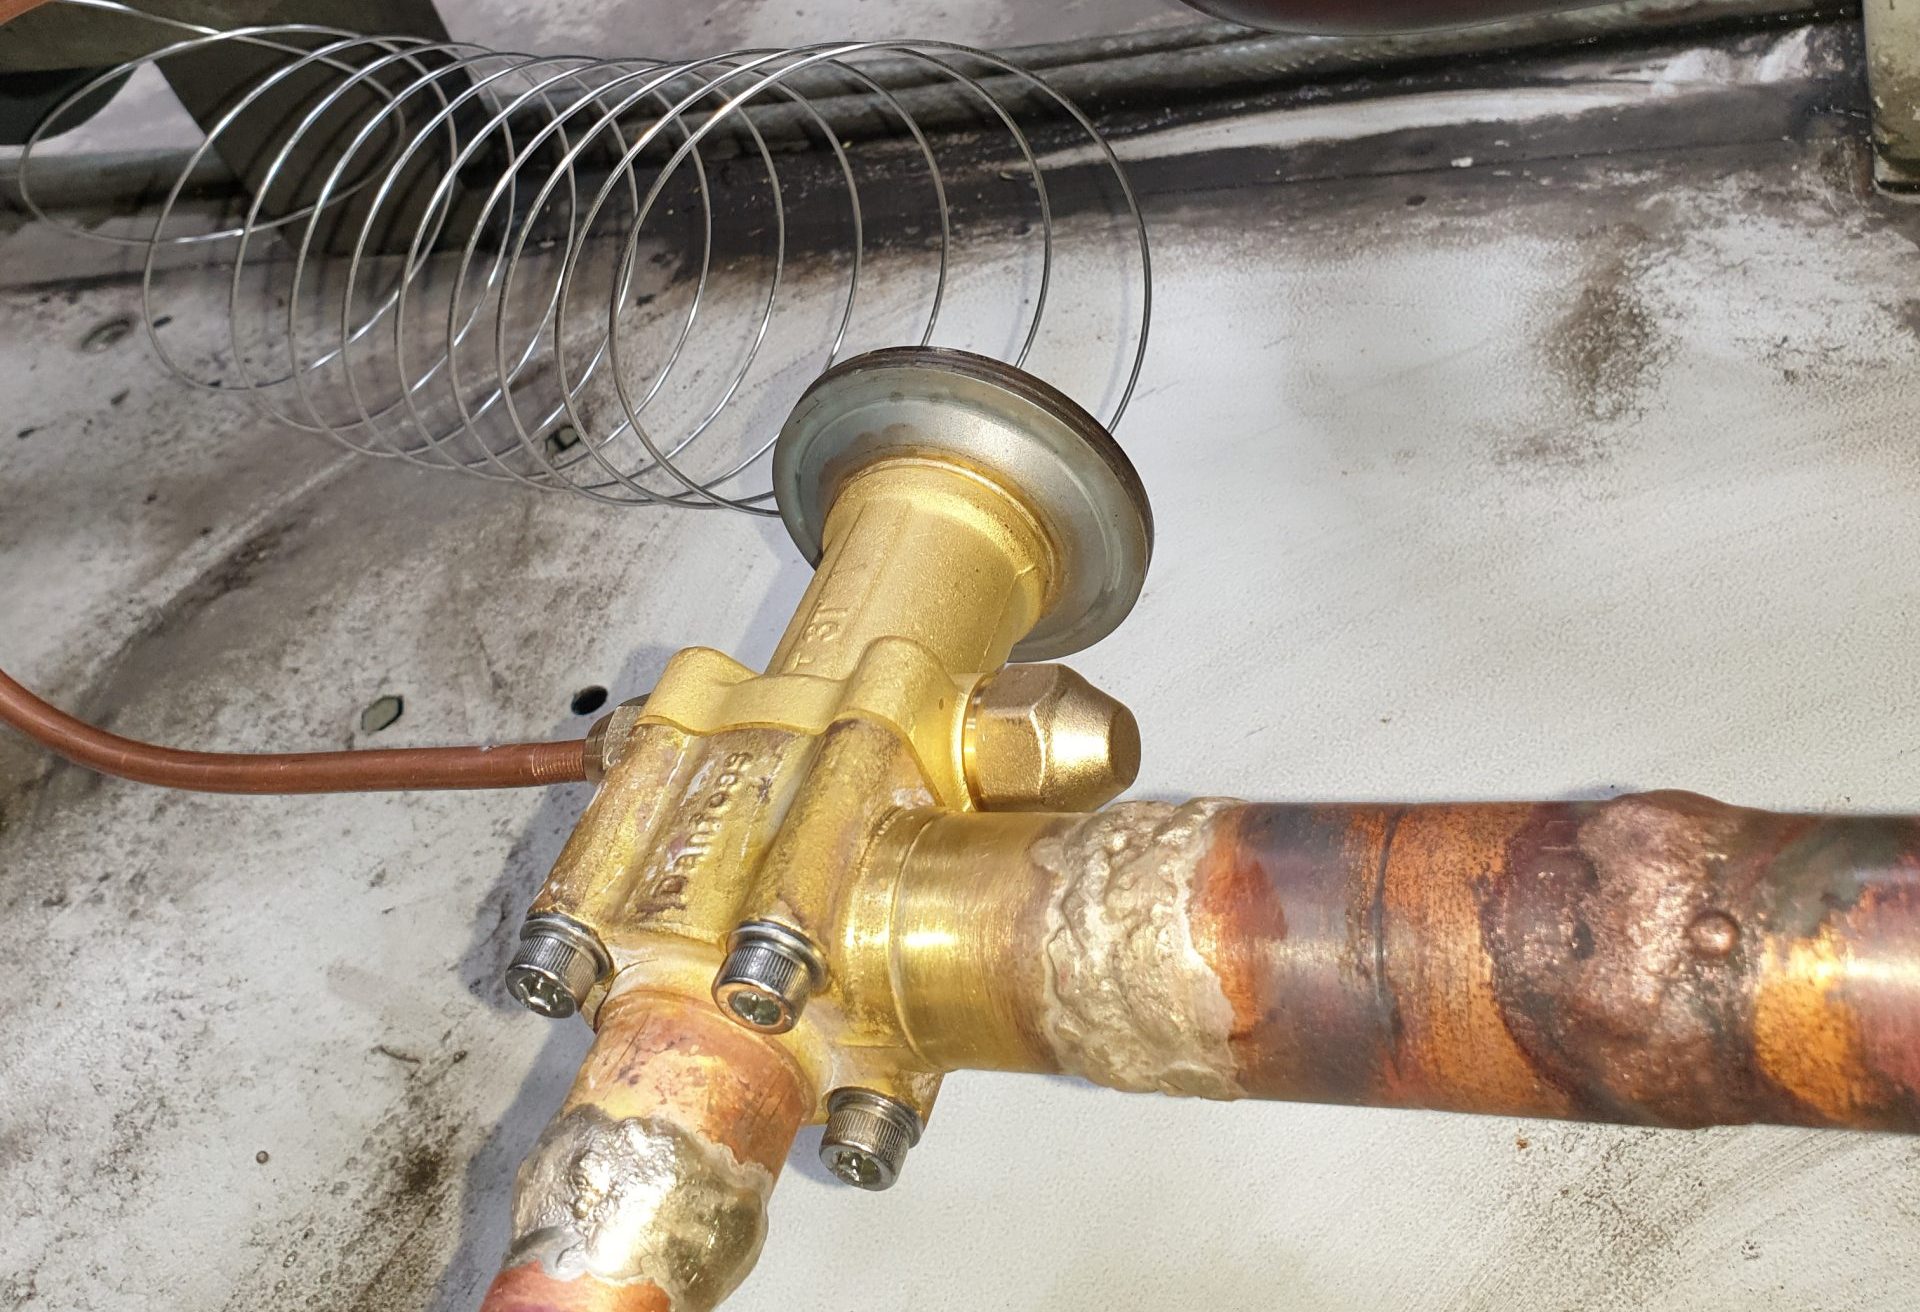 Showing how do chillers work - brass expansion valves inside machine